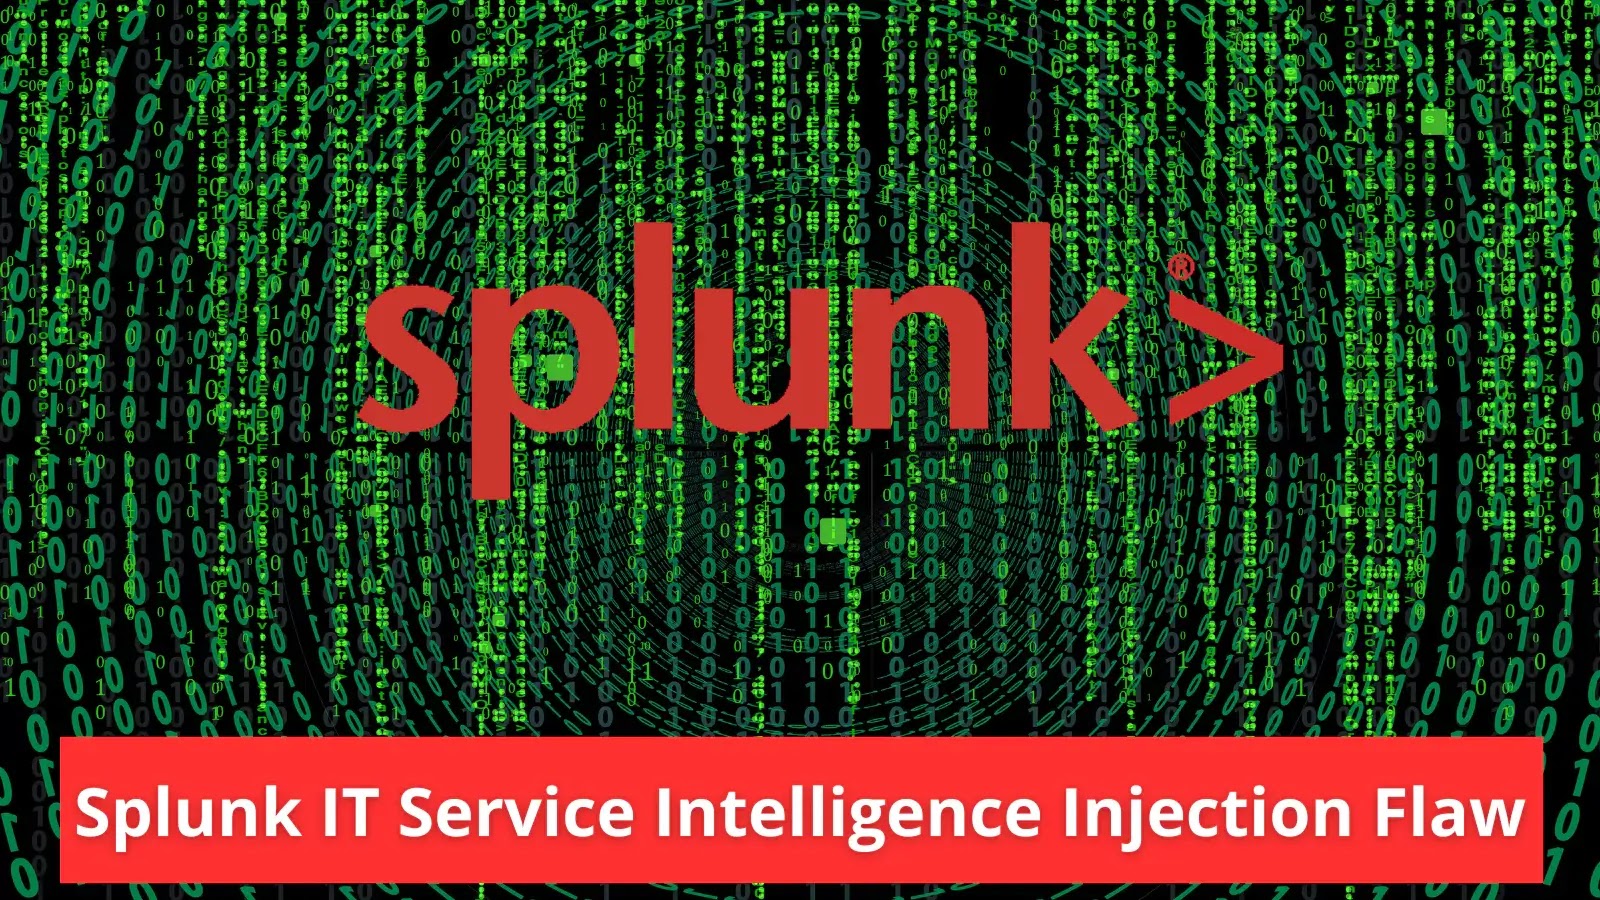 Splunk IT Service Intelligence Flaw Let Attacker Inject ANSI Codes in Log Files